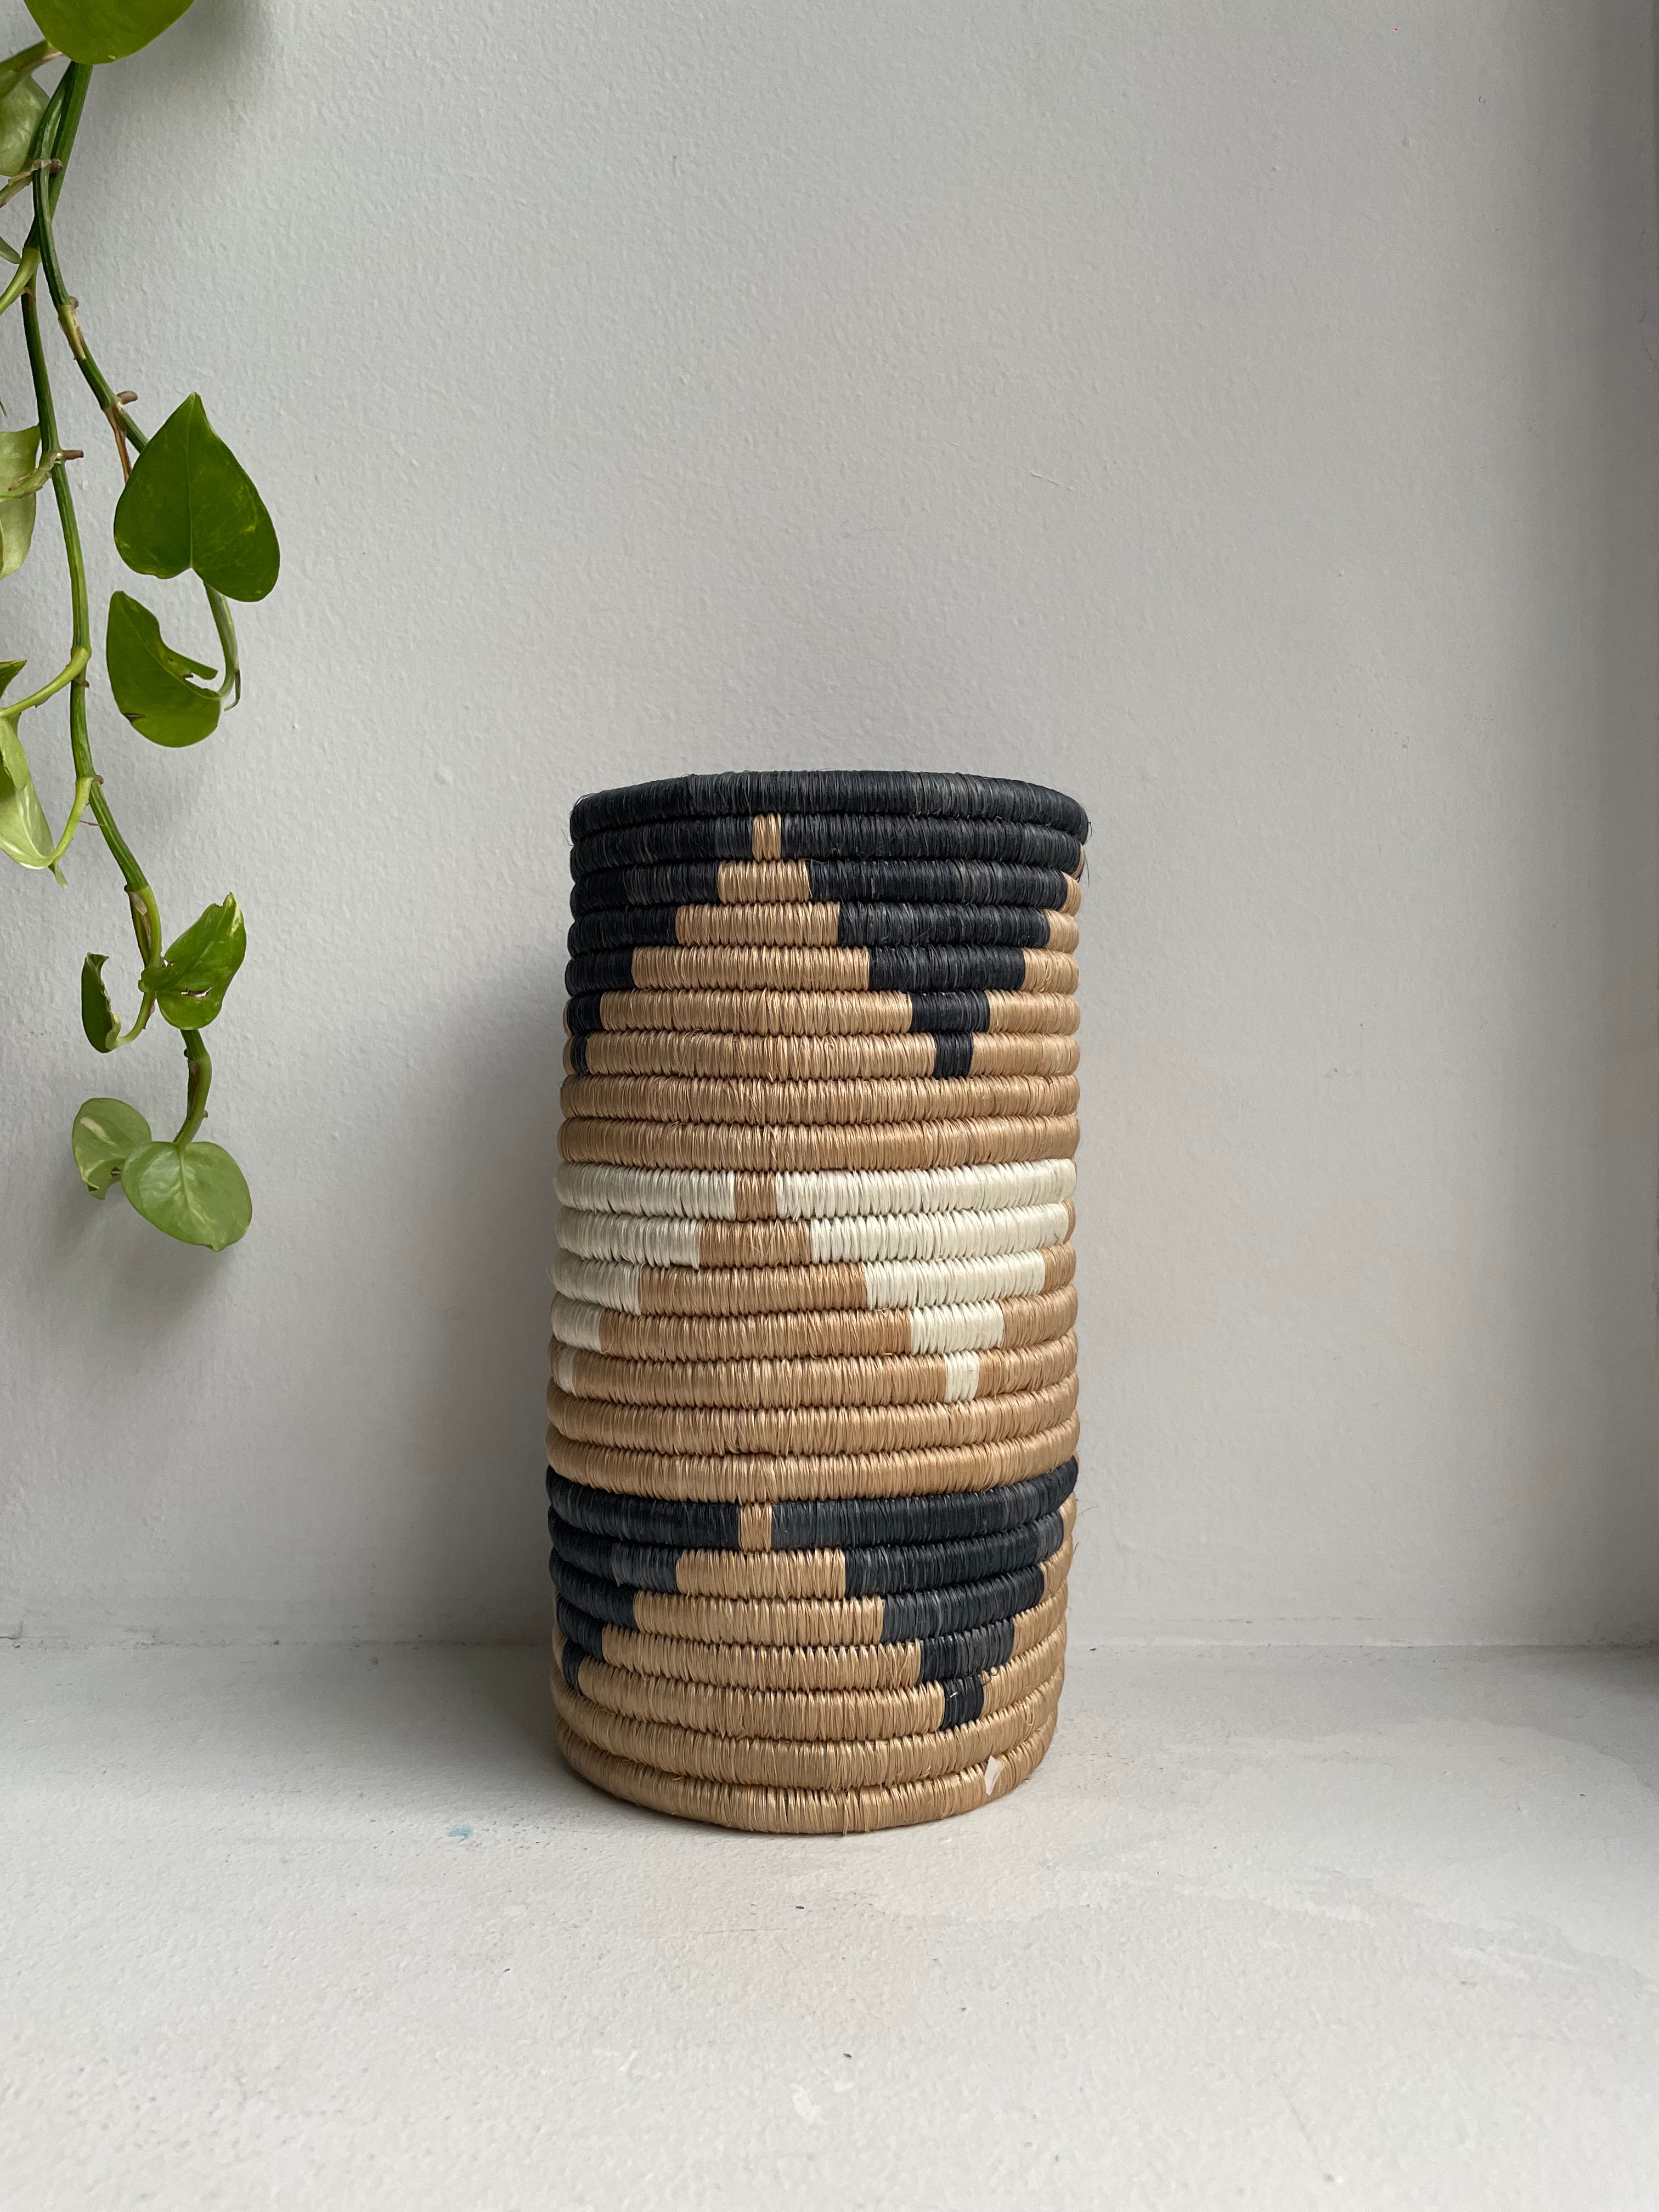 Display of black and white triangle vase